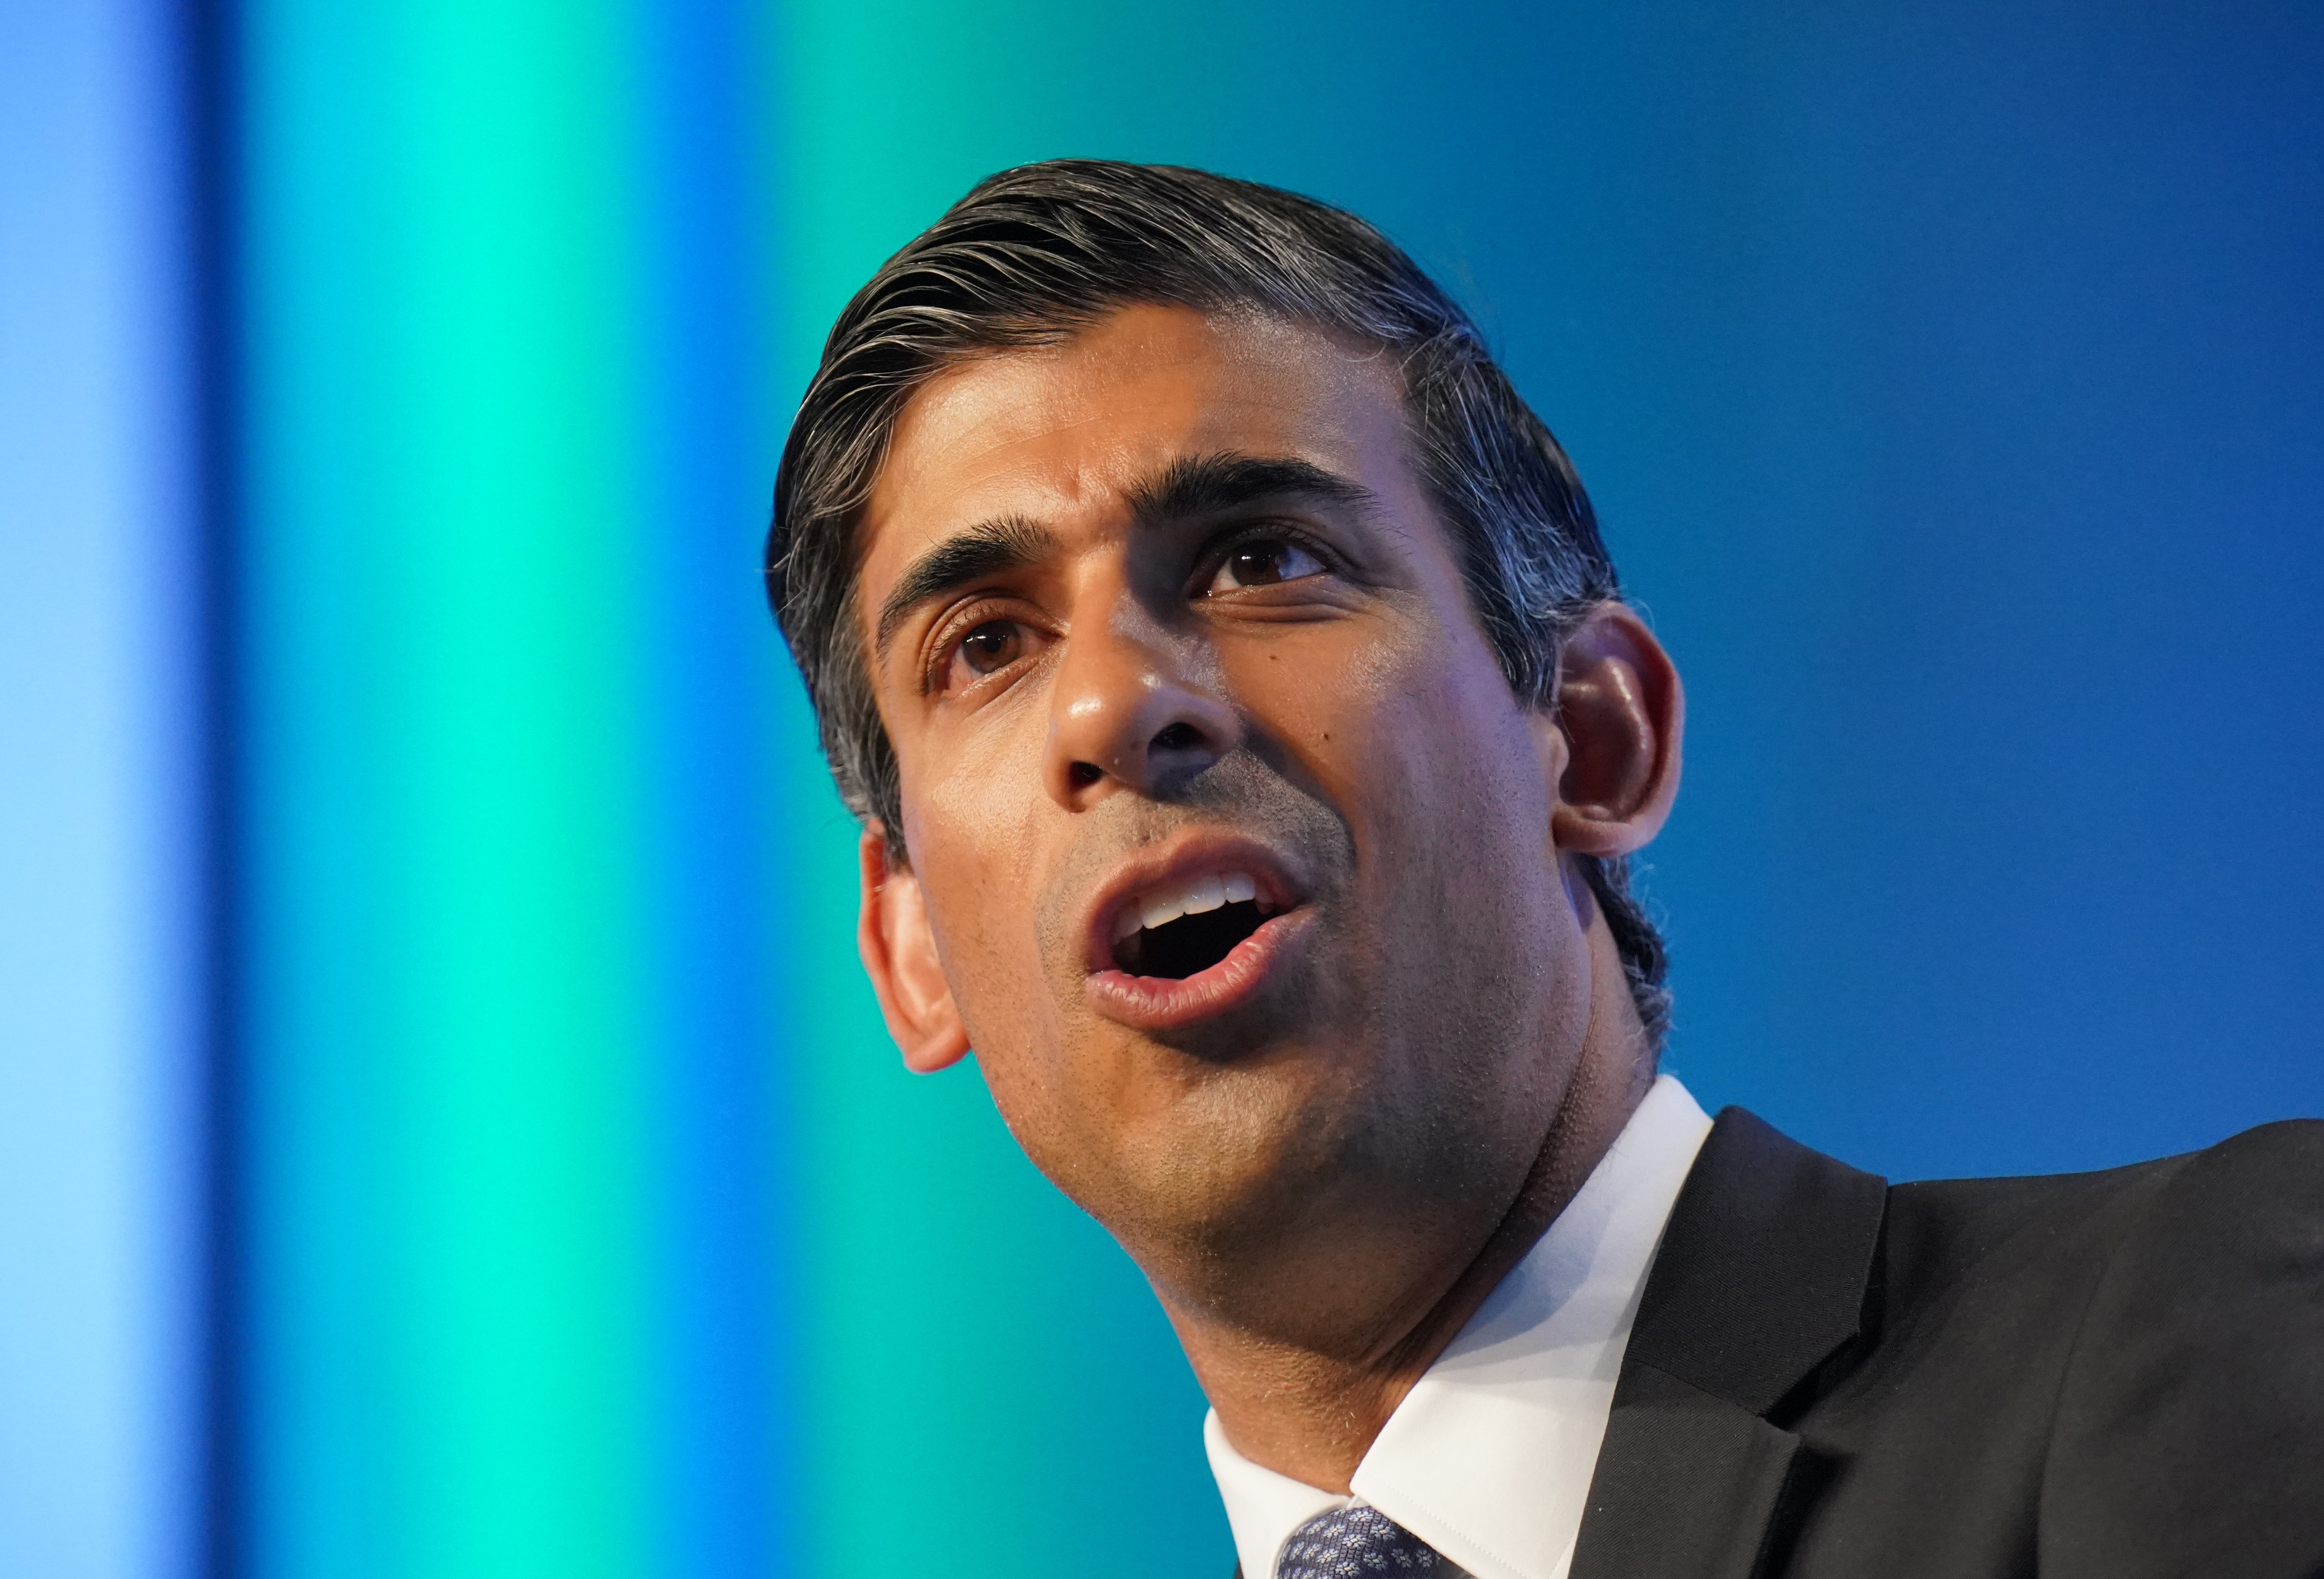 Chancellor Rishi Sunak has sought to damp down expectations of early tax cuts